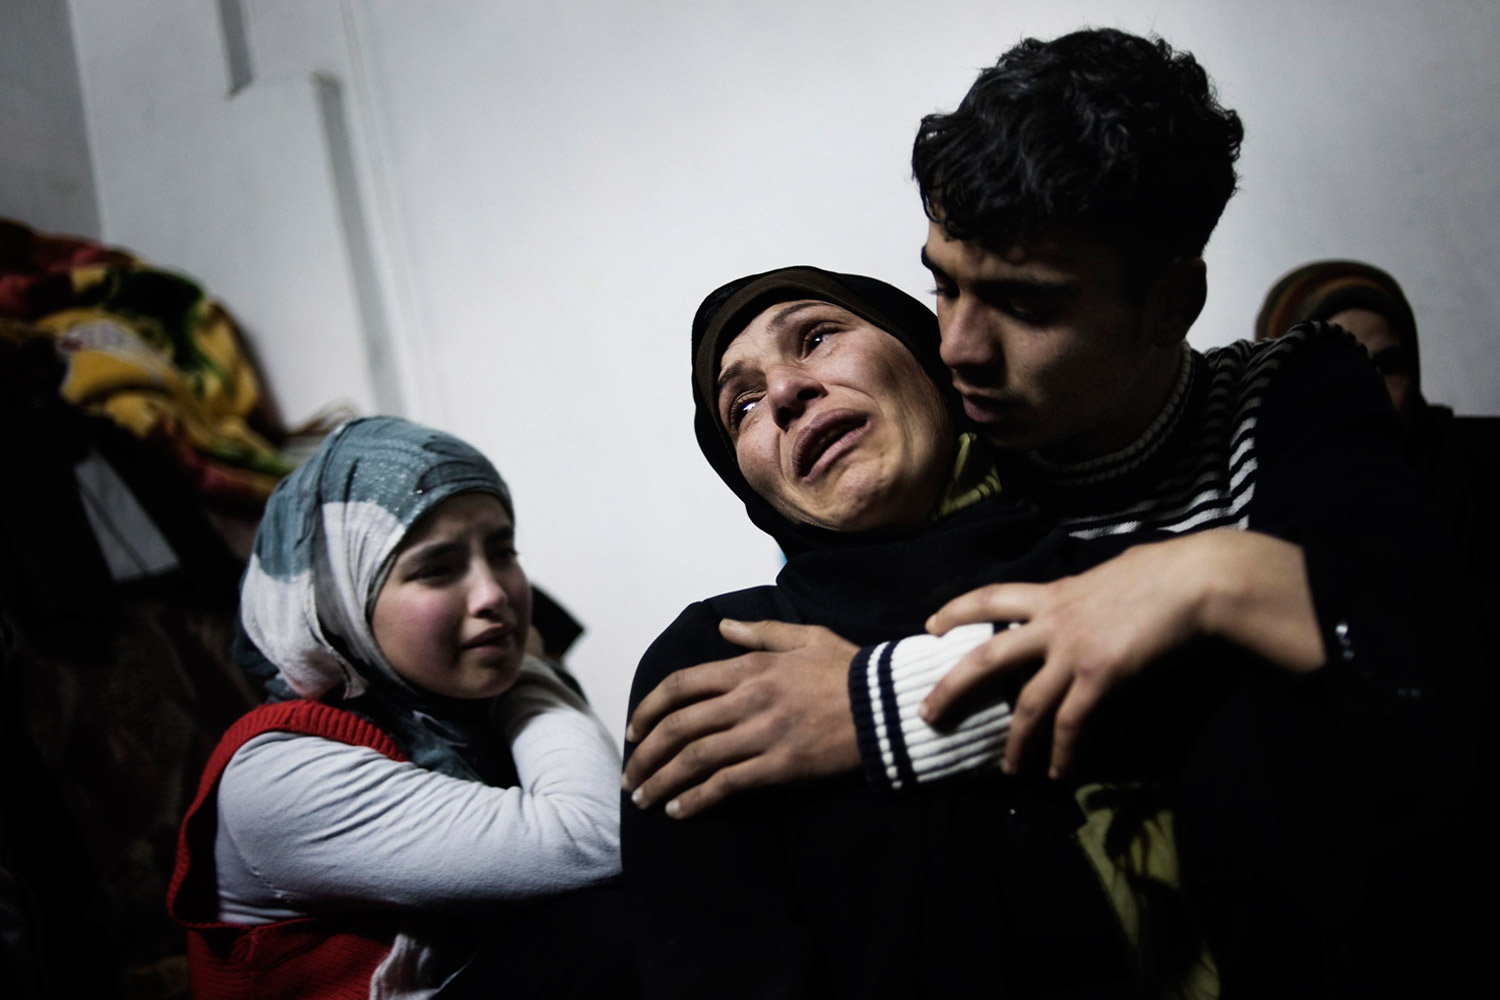 Feb. 20, 2012. A mother and her children cry over the loss of her other two sons, killed by a mortar attack launched by Al Assad forces, in Homs province.